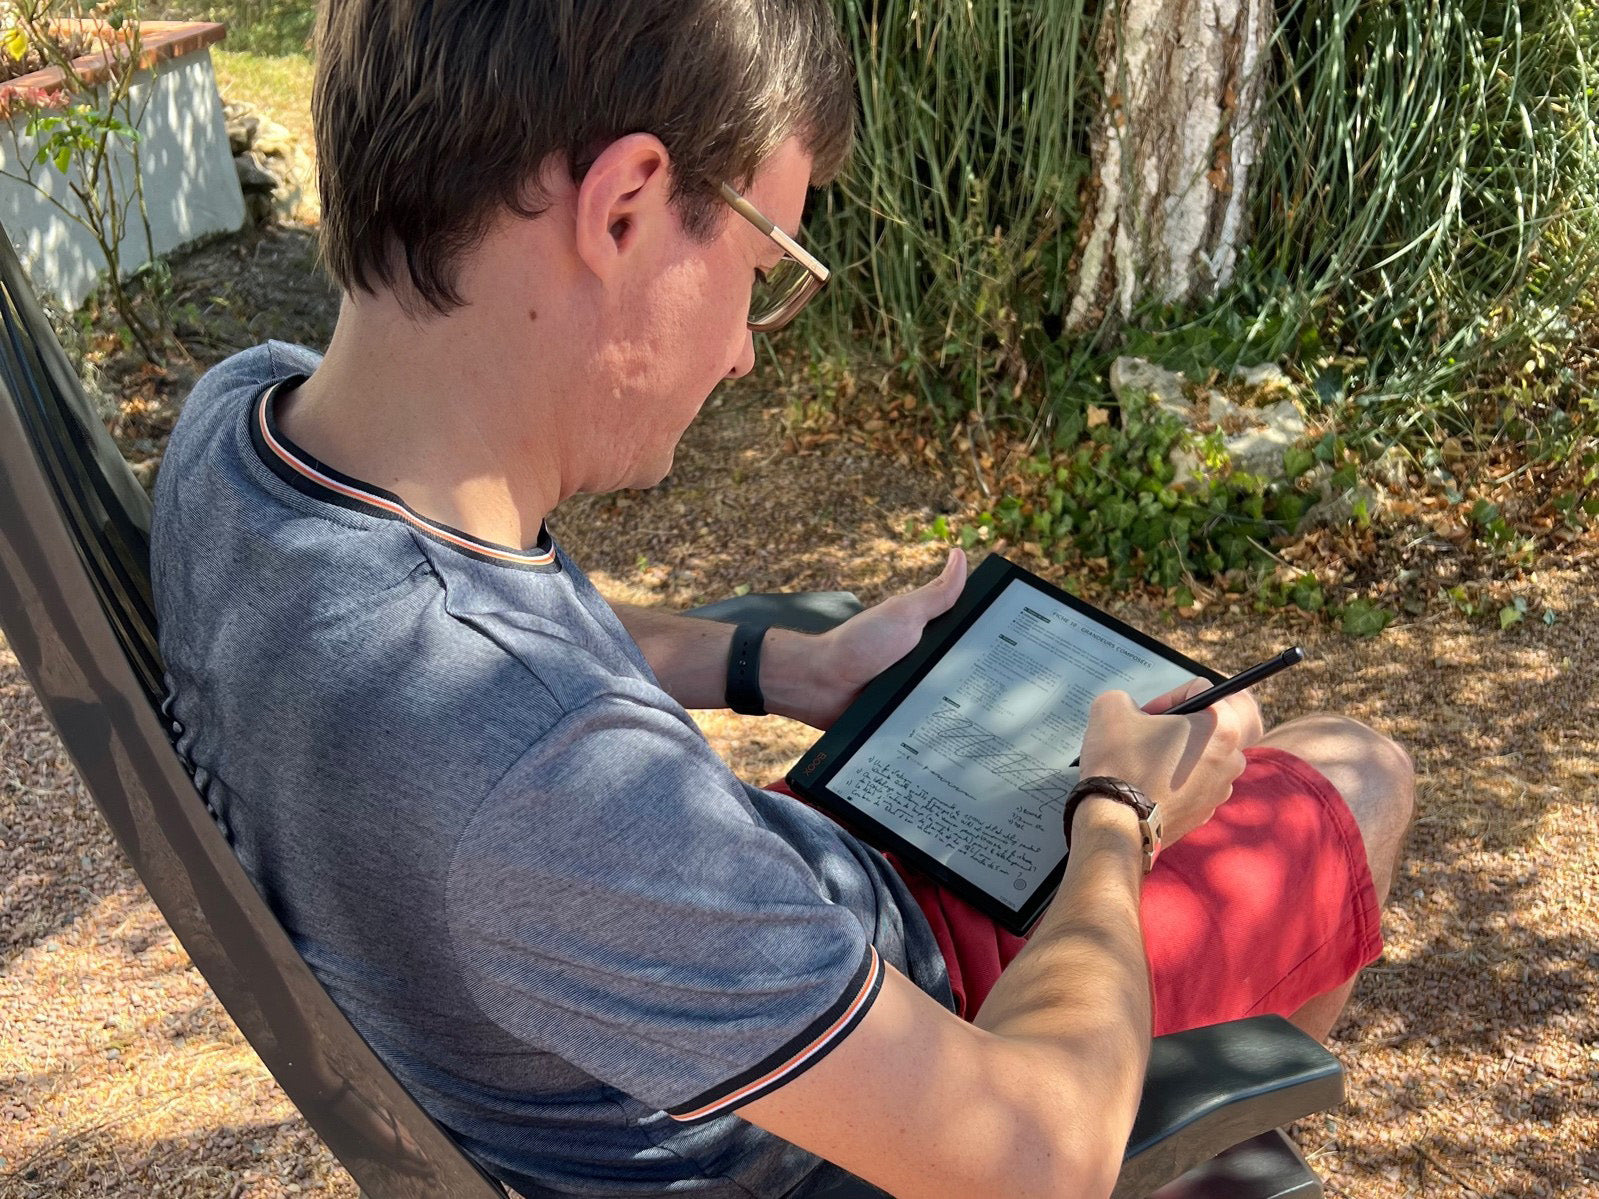 BOOX Note Air2 Plus note-taking outdoors